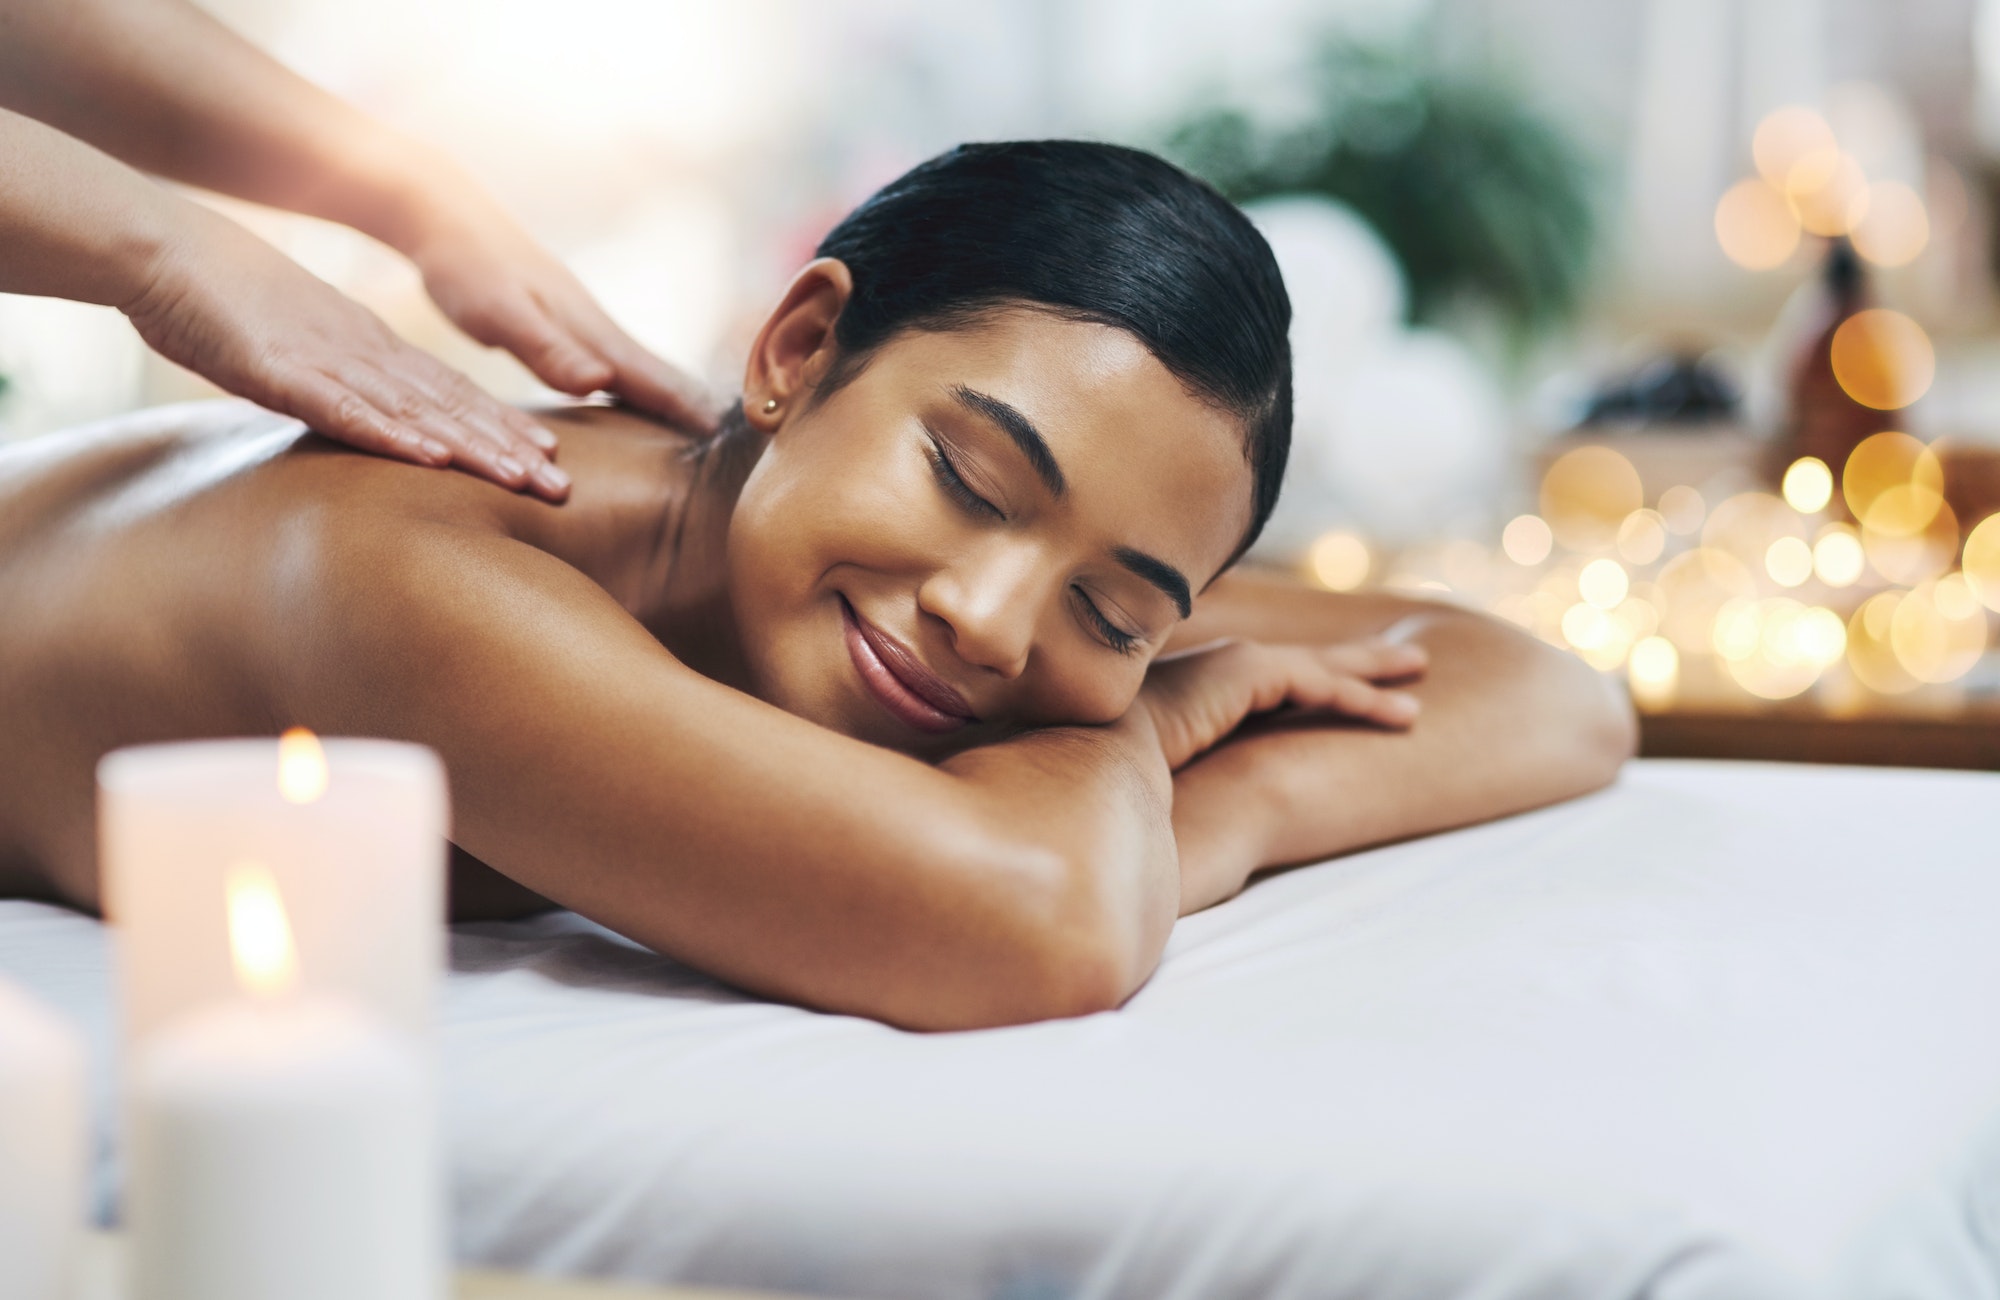 Shot of a relaxed an cheerful young woman getting a massage indoors at a spa